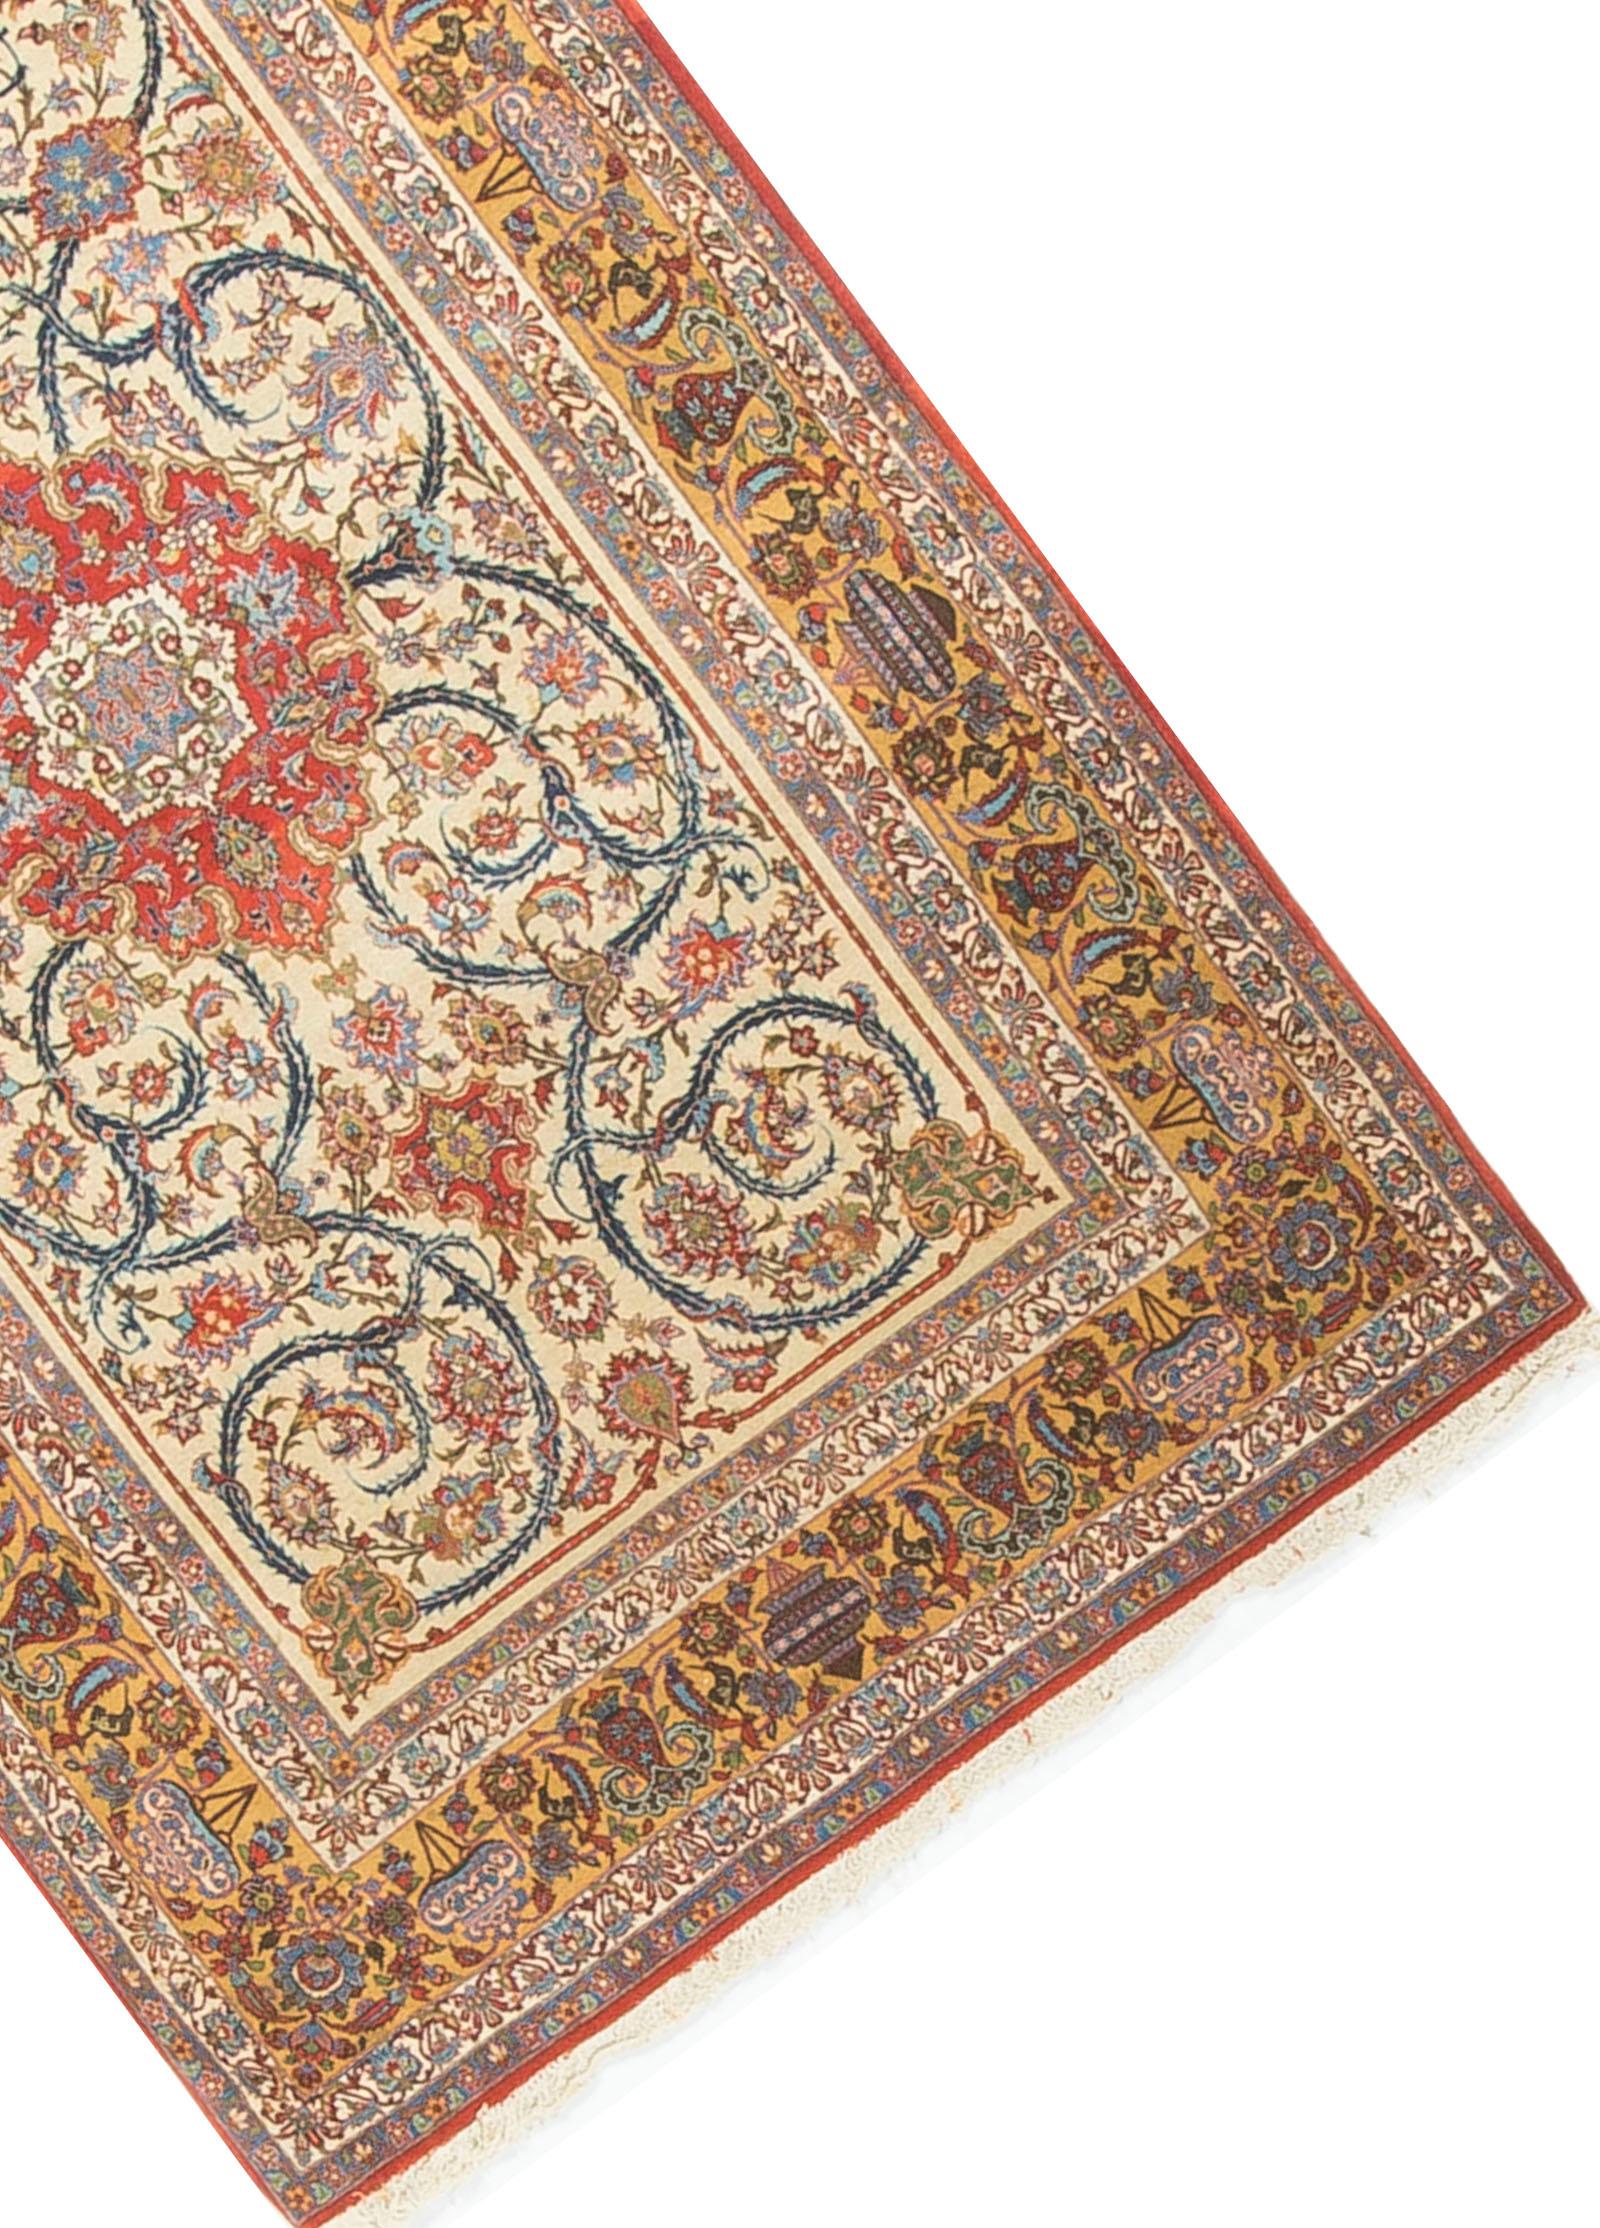 This lovely little antique Isphahan rug has an ivory ground with a curvilinear pattern surrounding a red central motif. All enclosed by multiple borders in golds and ivory.